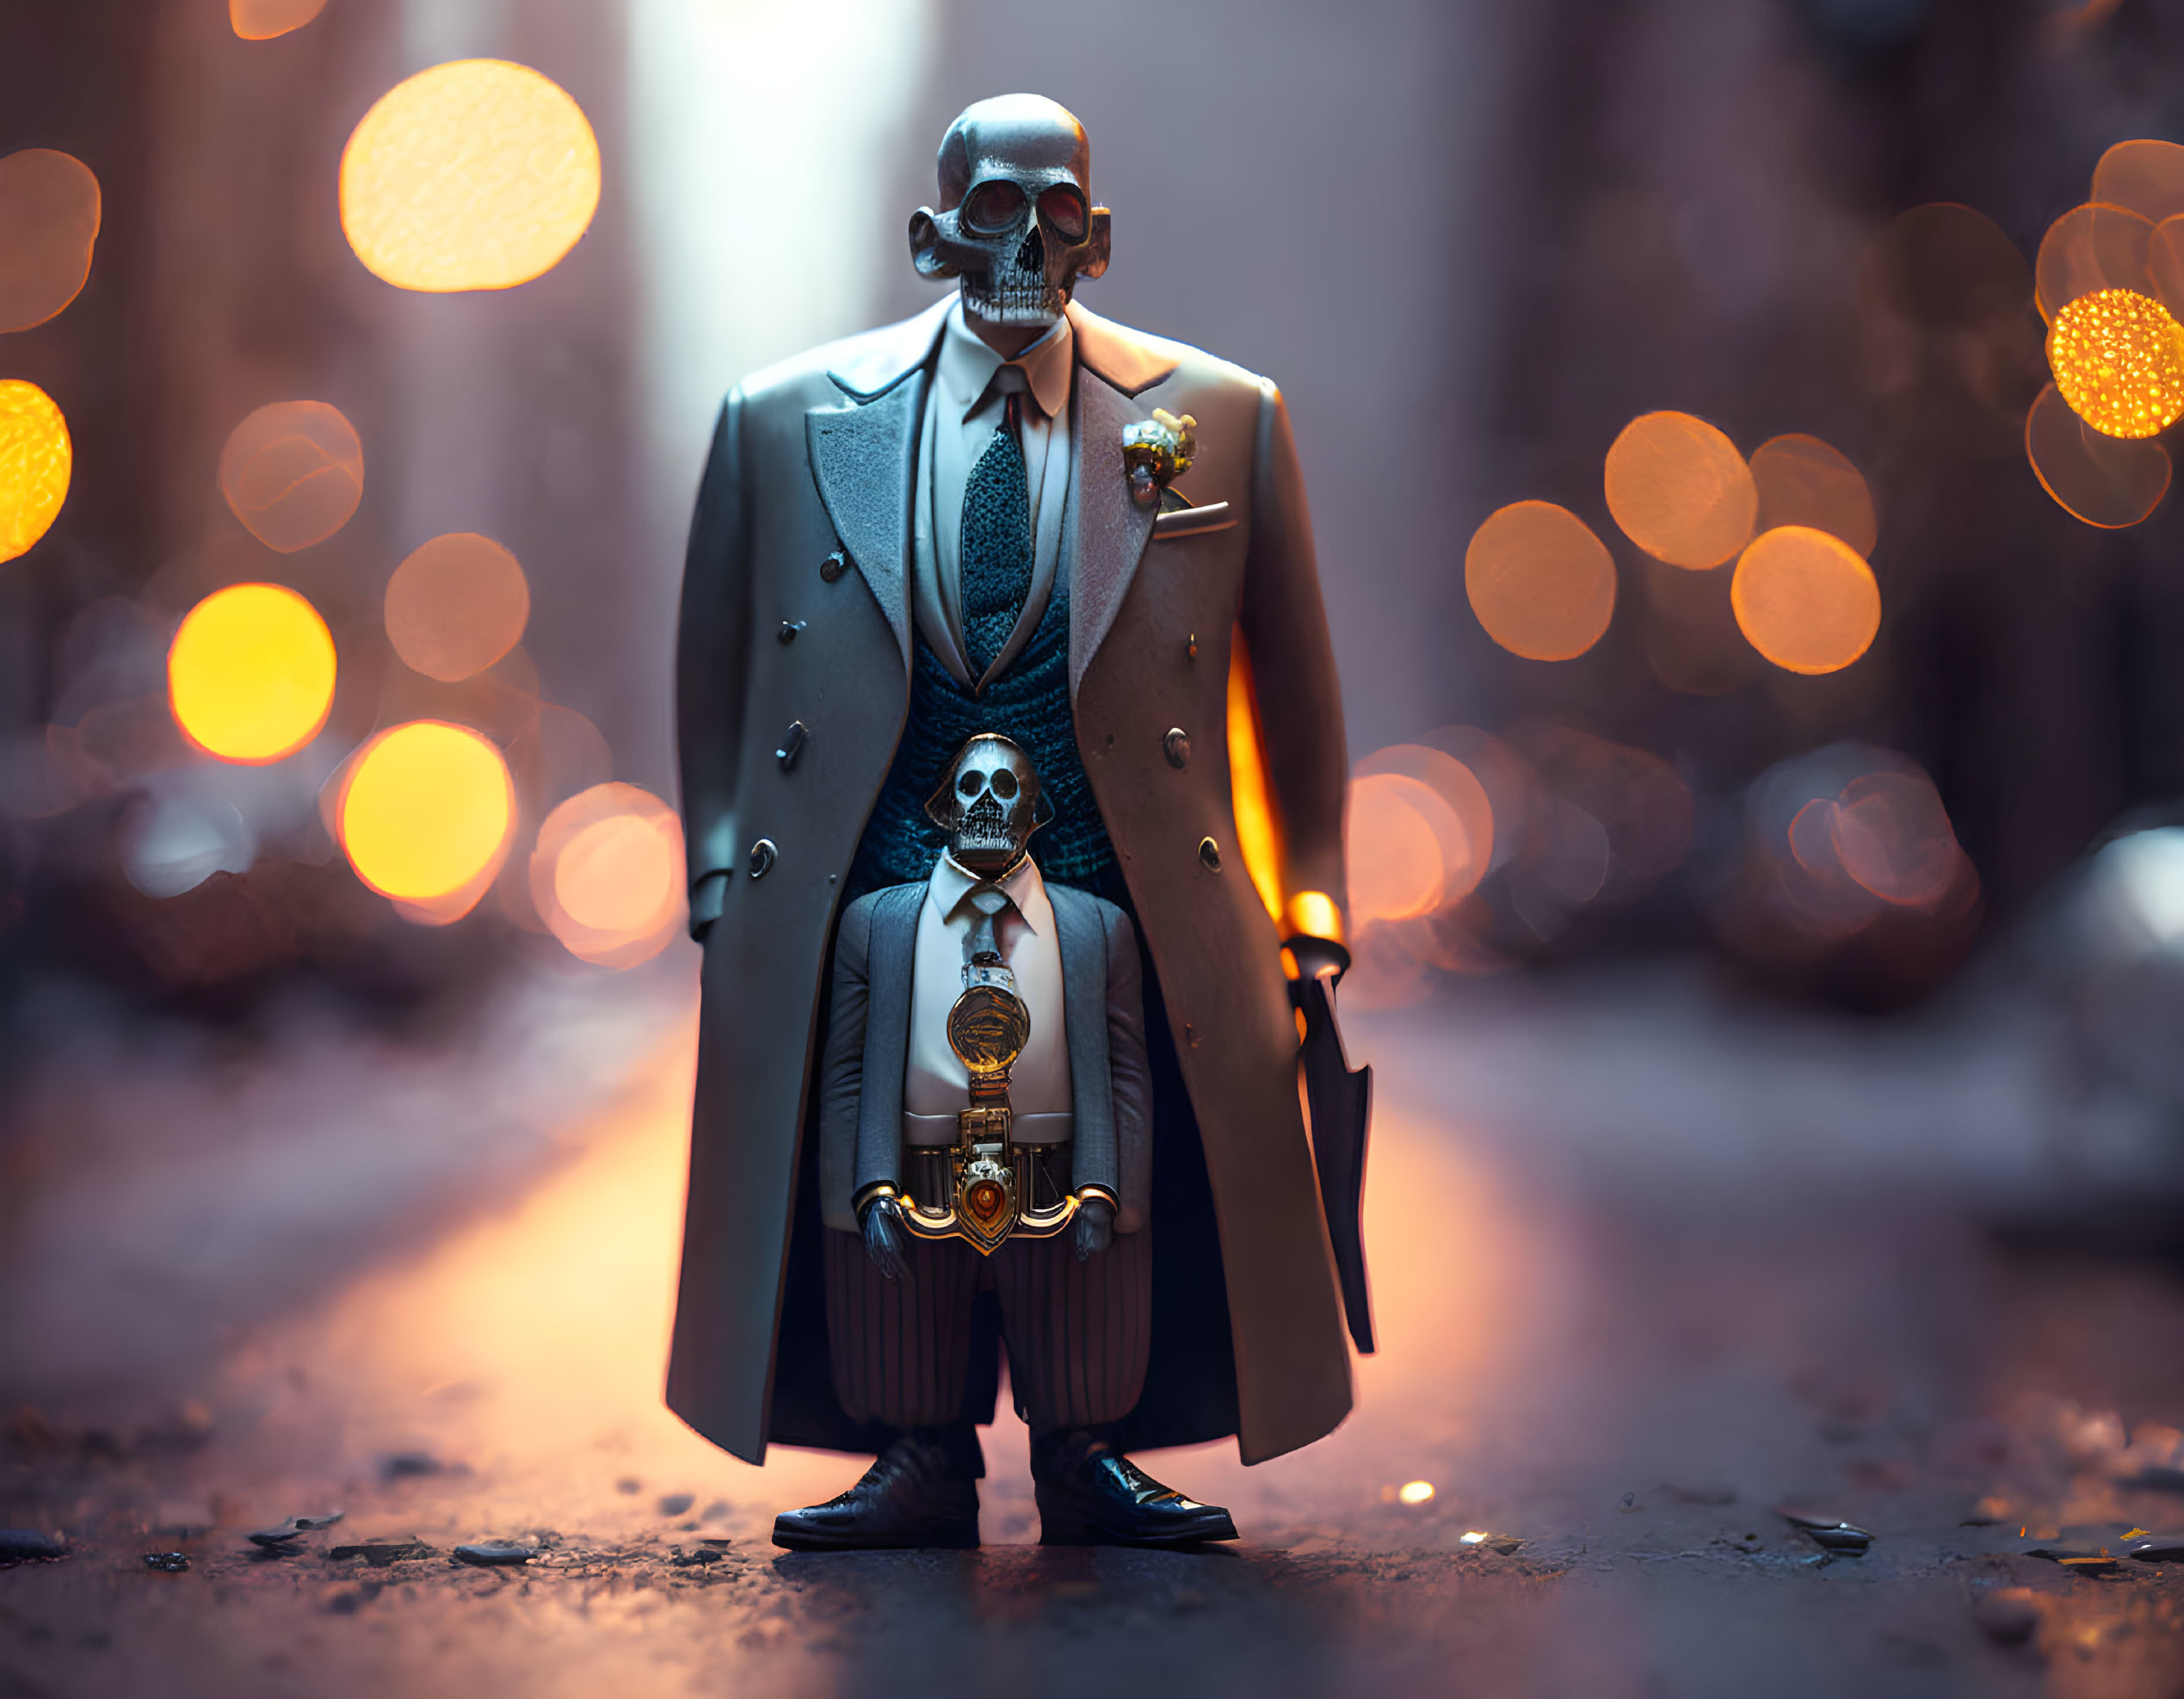 Skull-headed figurine in elegant suit with cane, soft glowing lights